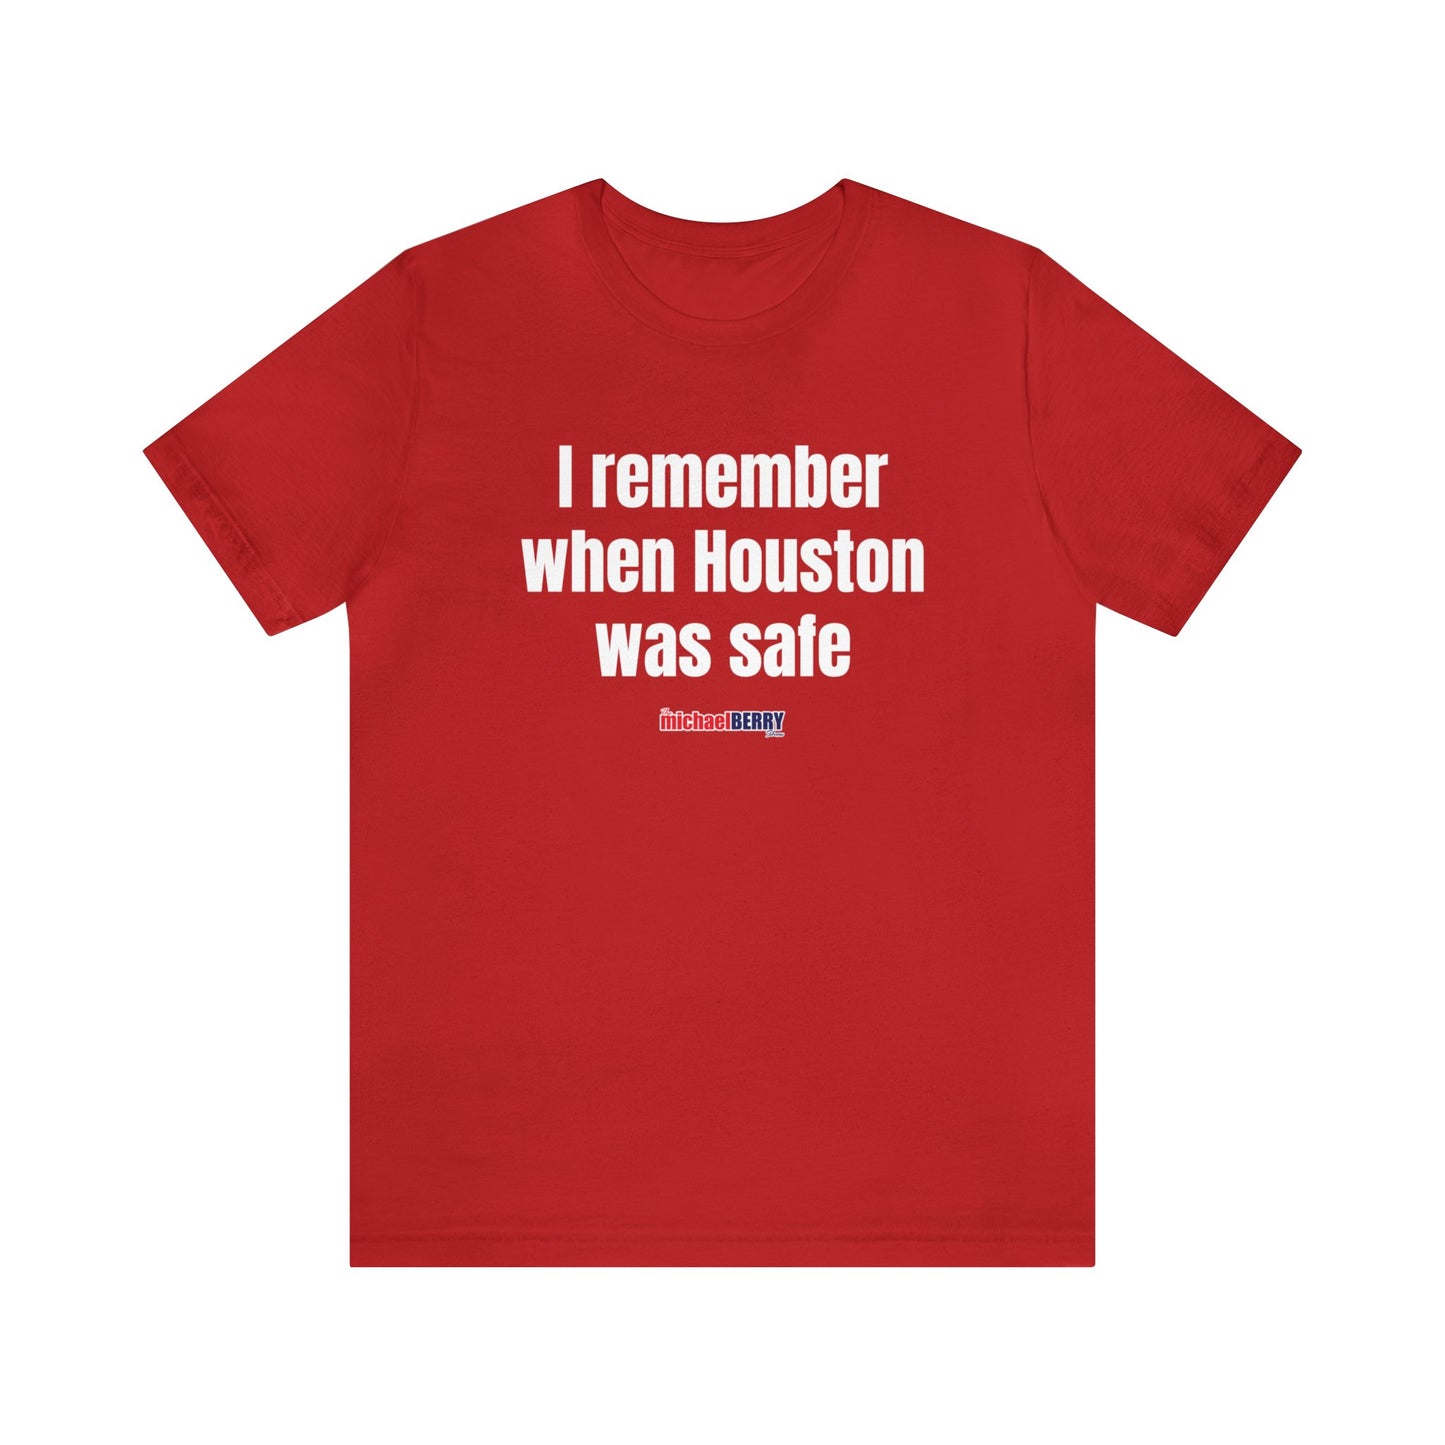 I remember when Houston was safe - Unisex Jersey Short Sleeve Tee